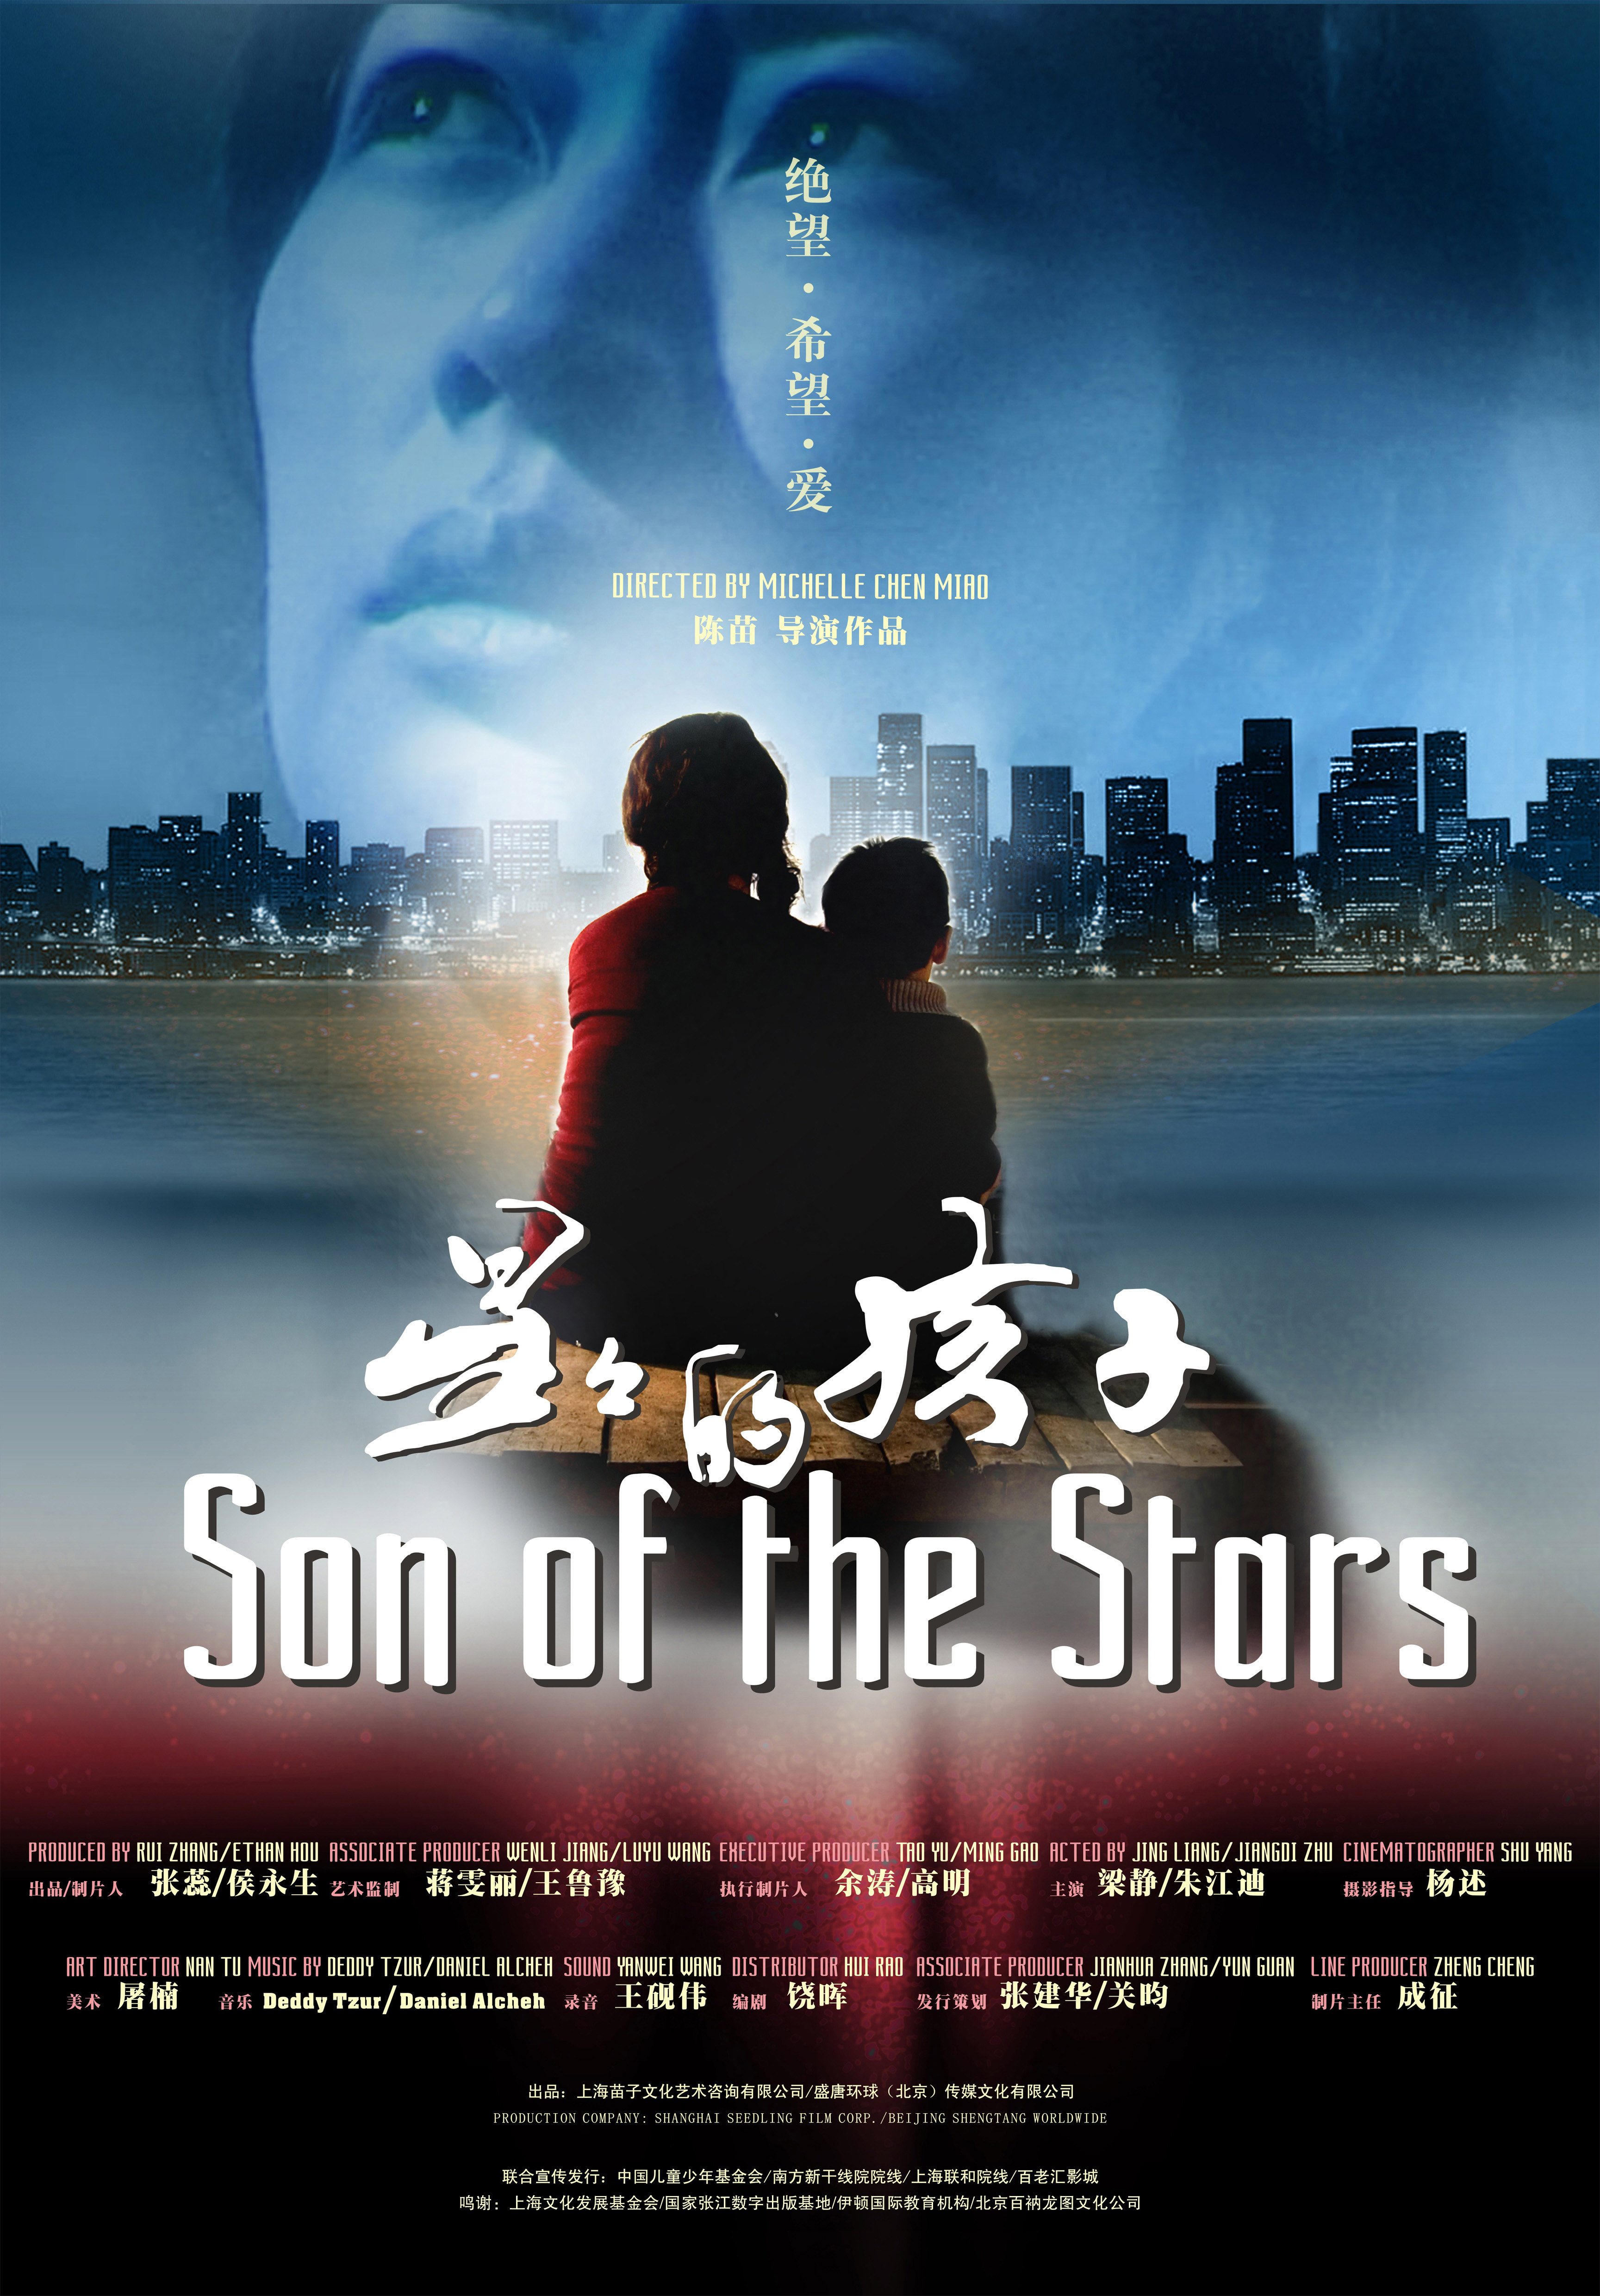 Son of the Stars official poster